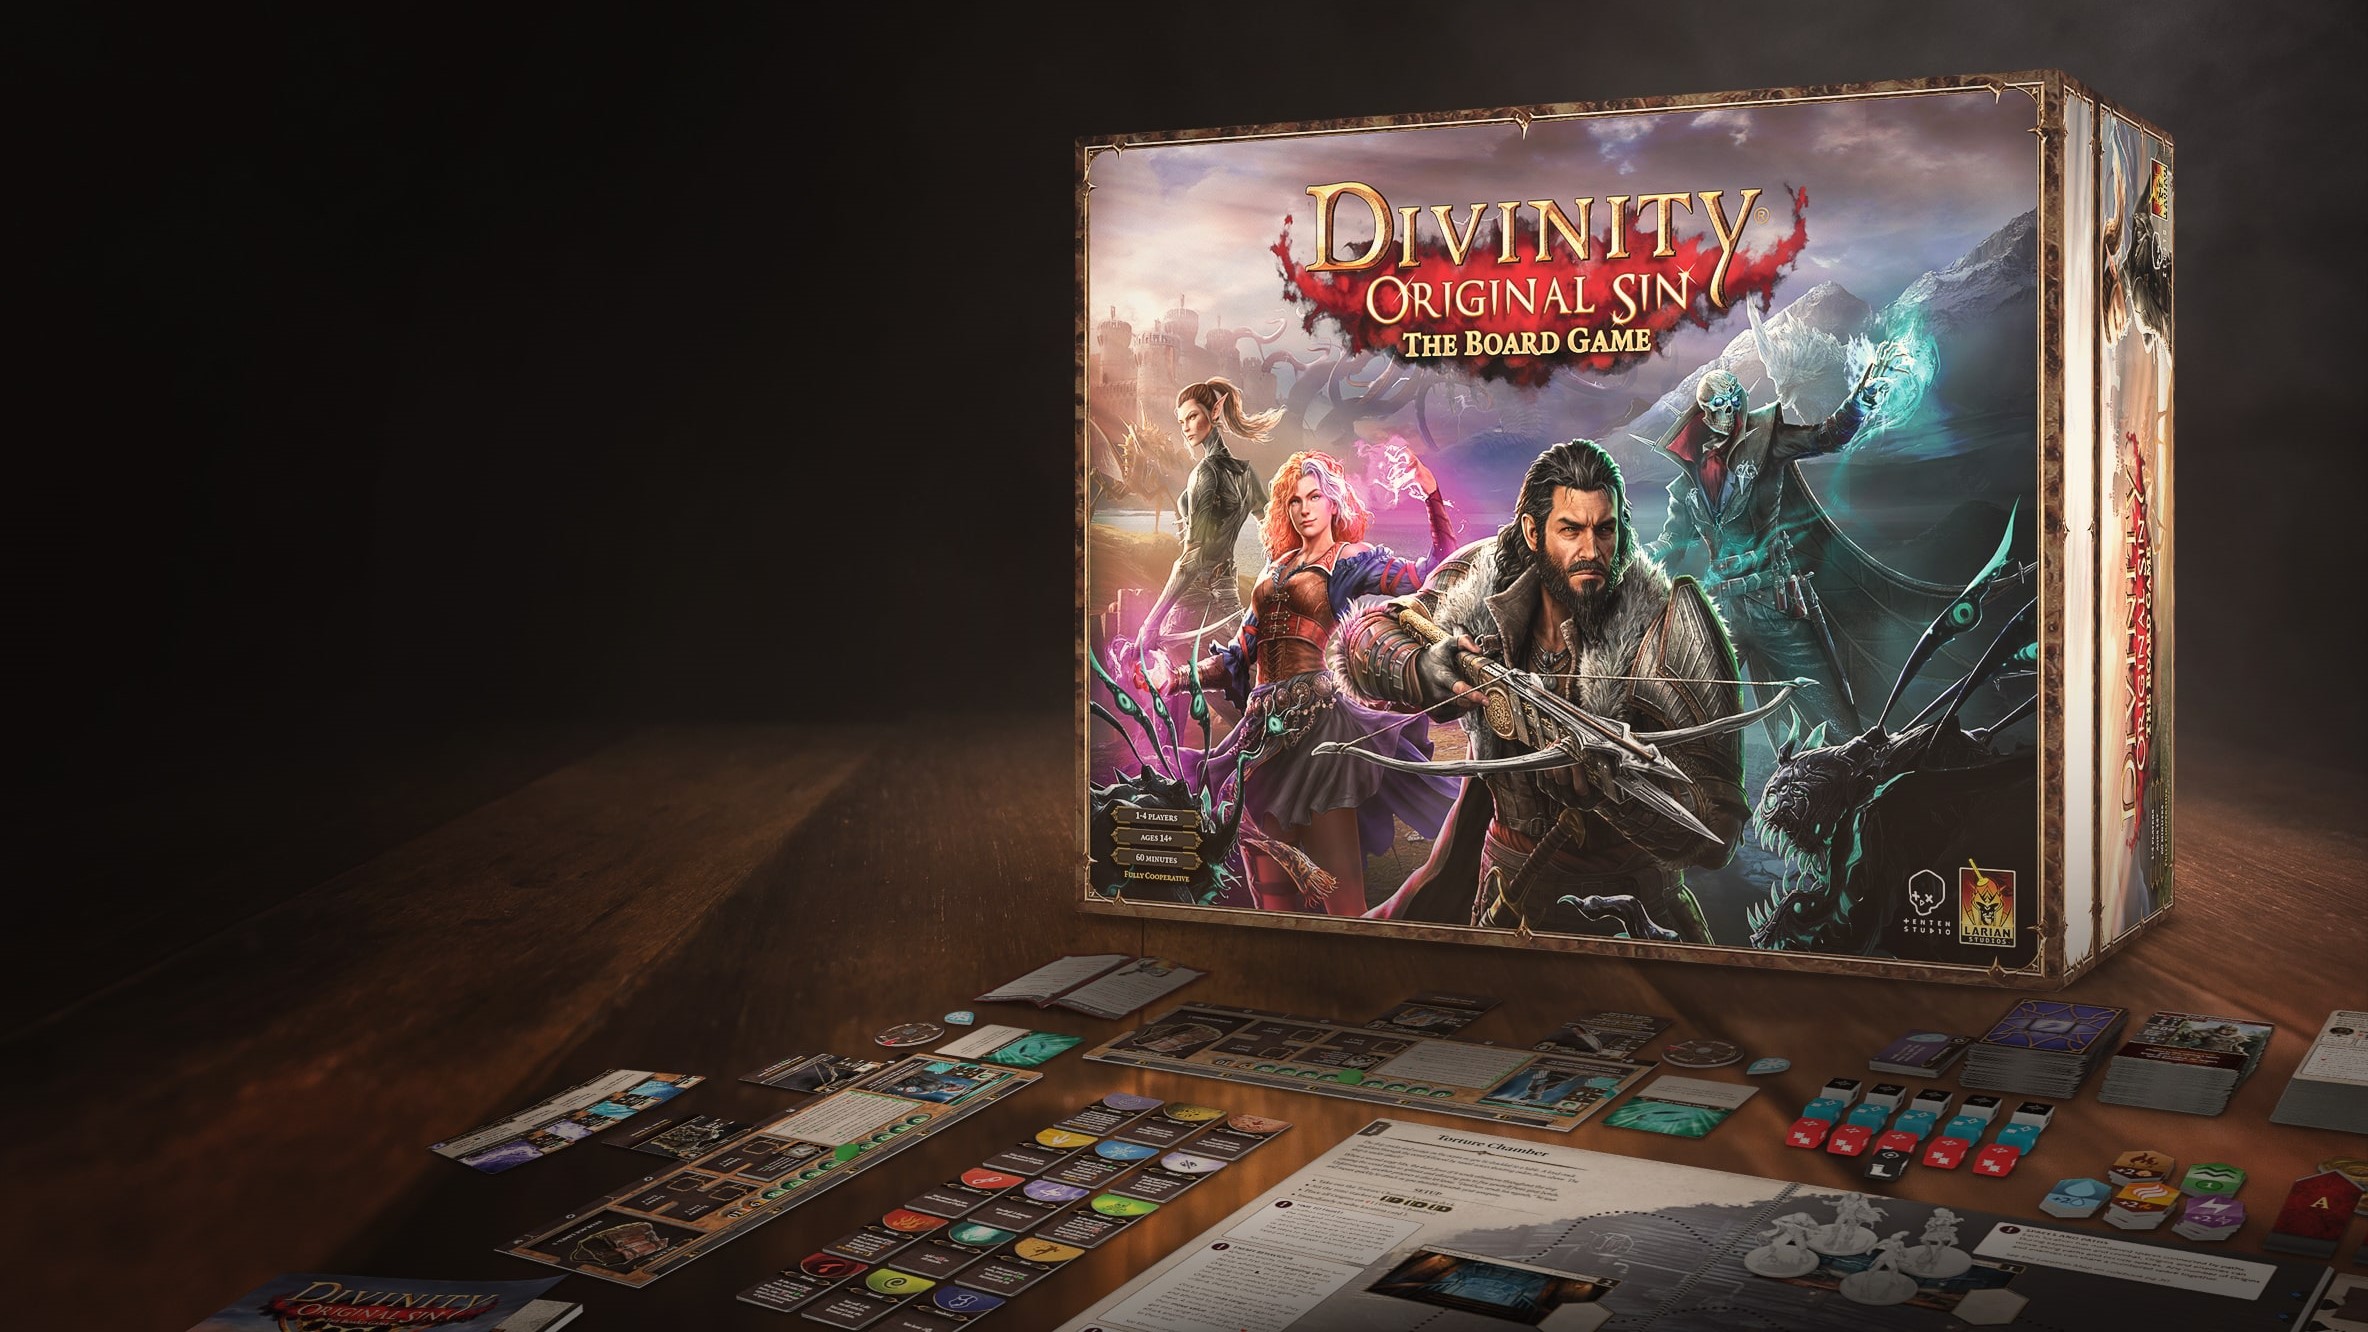  The Divinity: Original Sin board game took 6 years to make because Larian was determined to do right by the series: 'We're not going to do a piss poor job with a game that's part of an IP that we care about' 